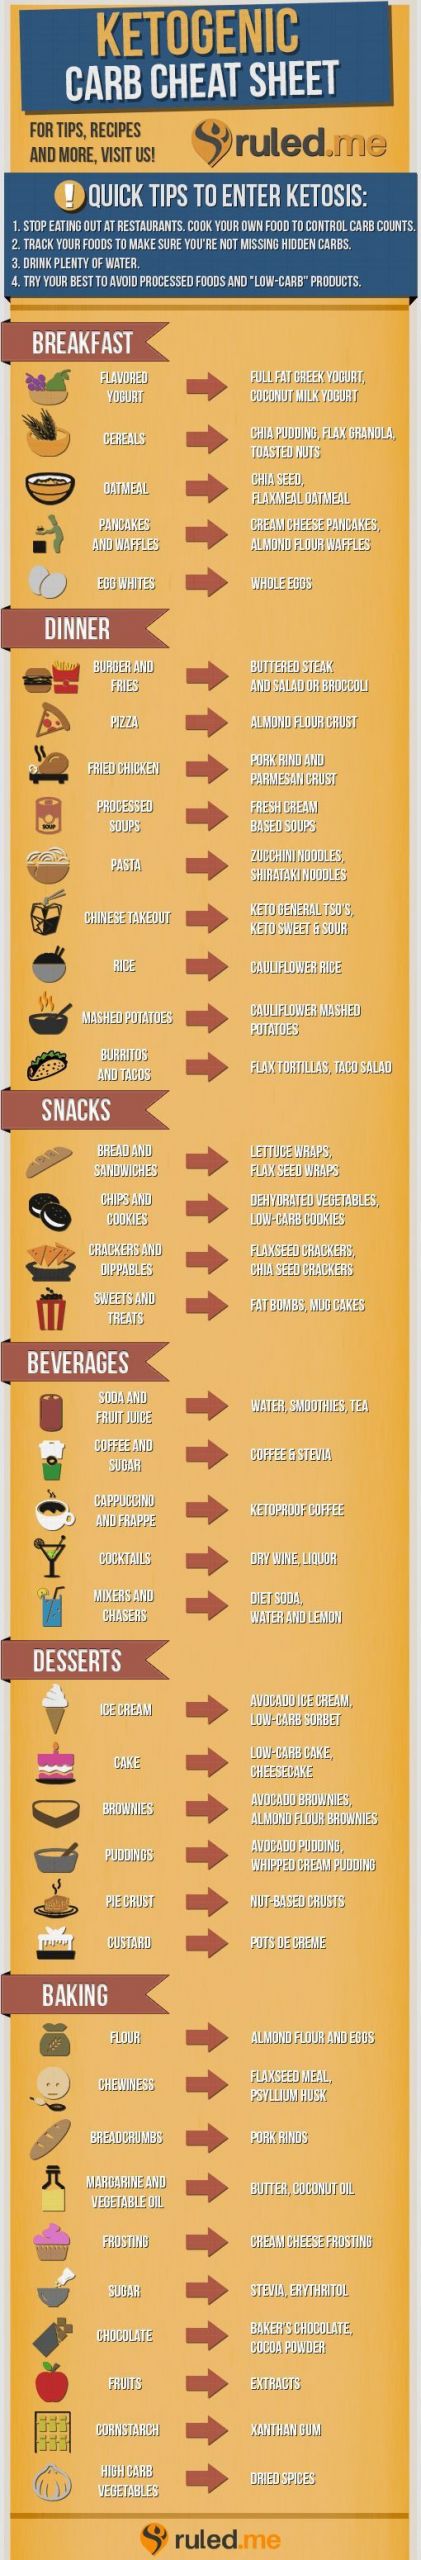 Keto Diet Cheat Sheet
 Health Ketogenic t and Tips for losing weight on Pinterest